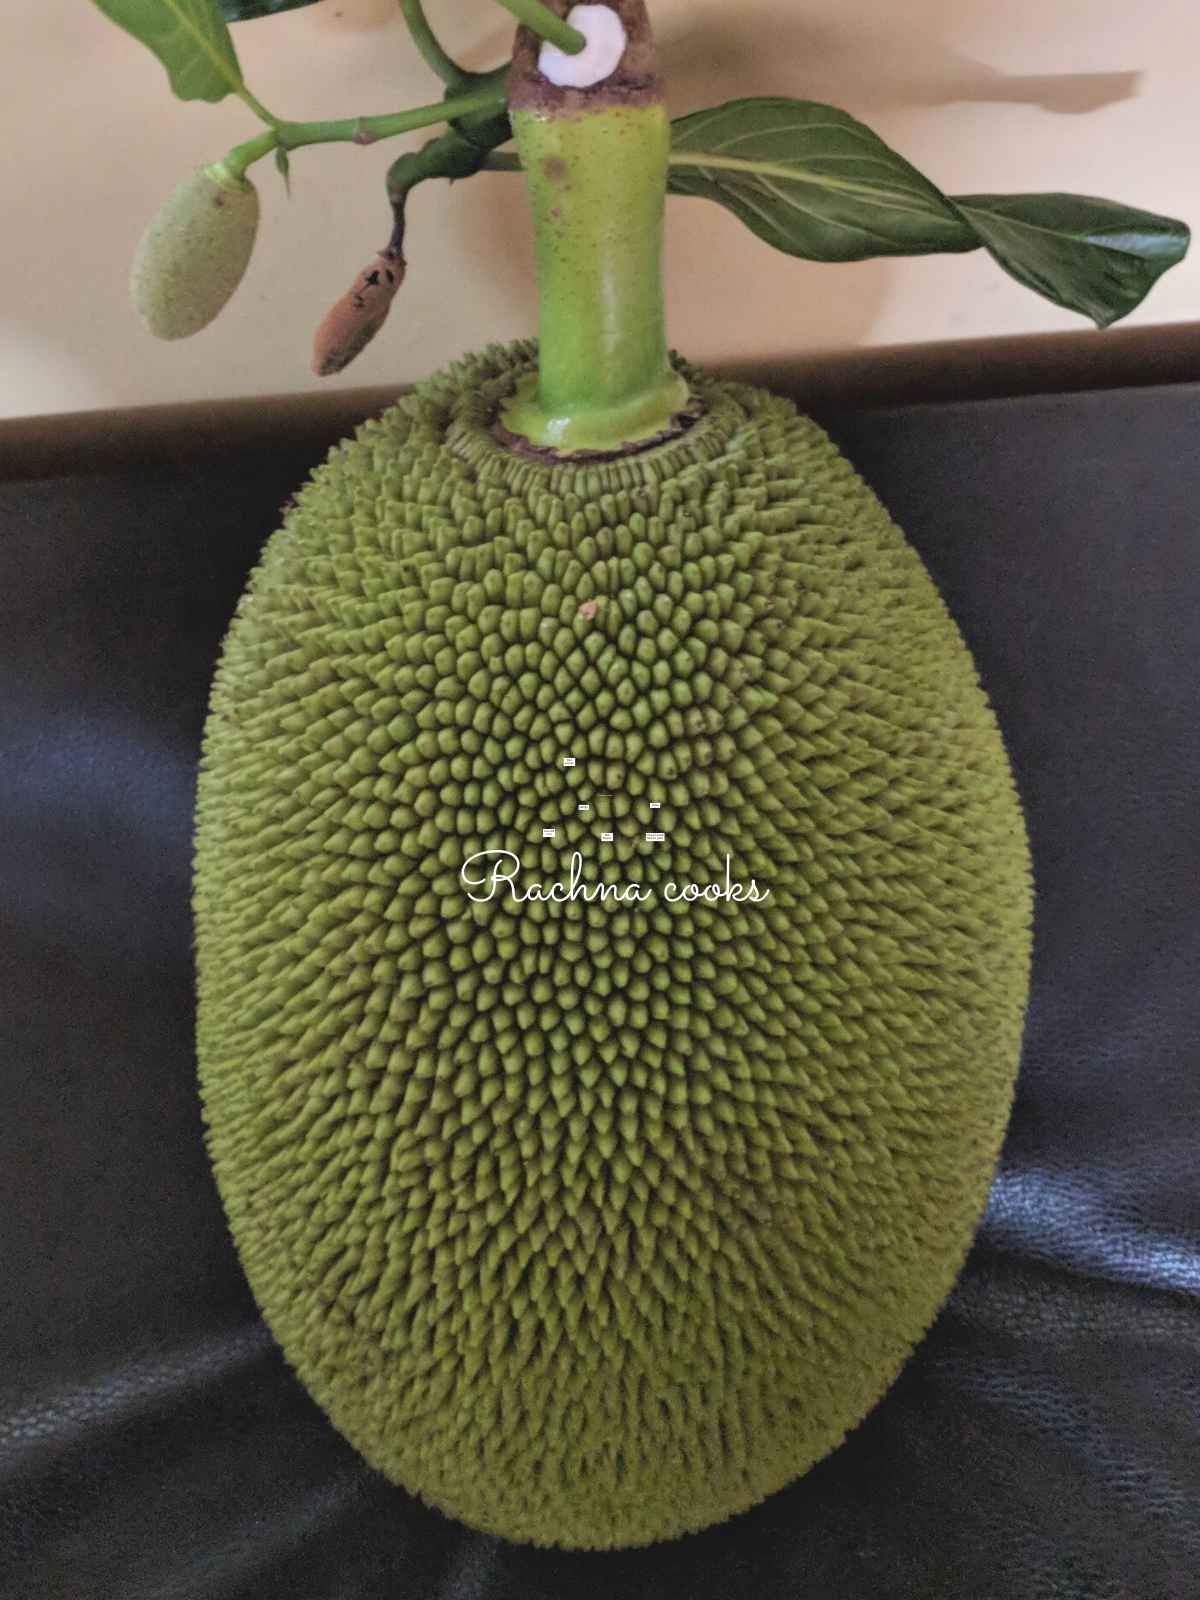 Green jackfruit with stem and leaf visible.